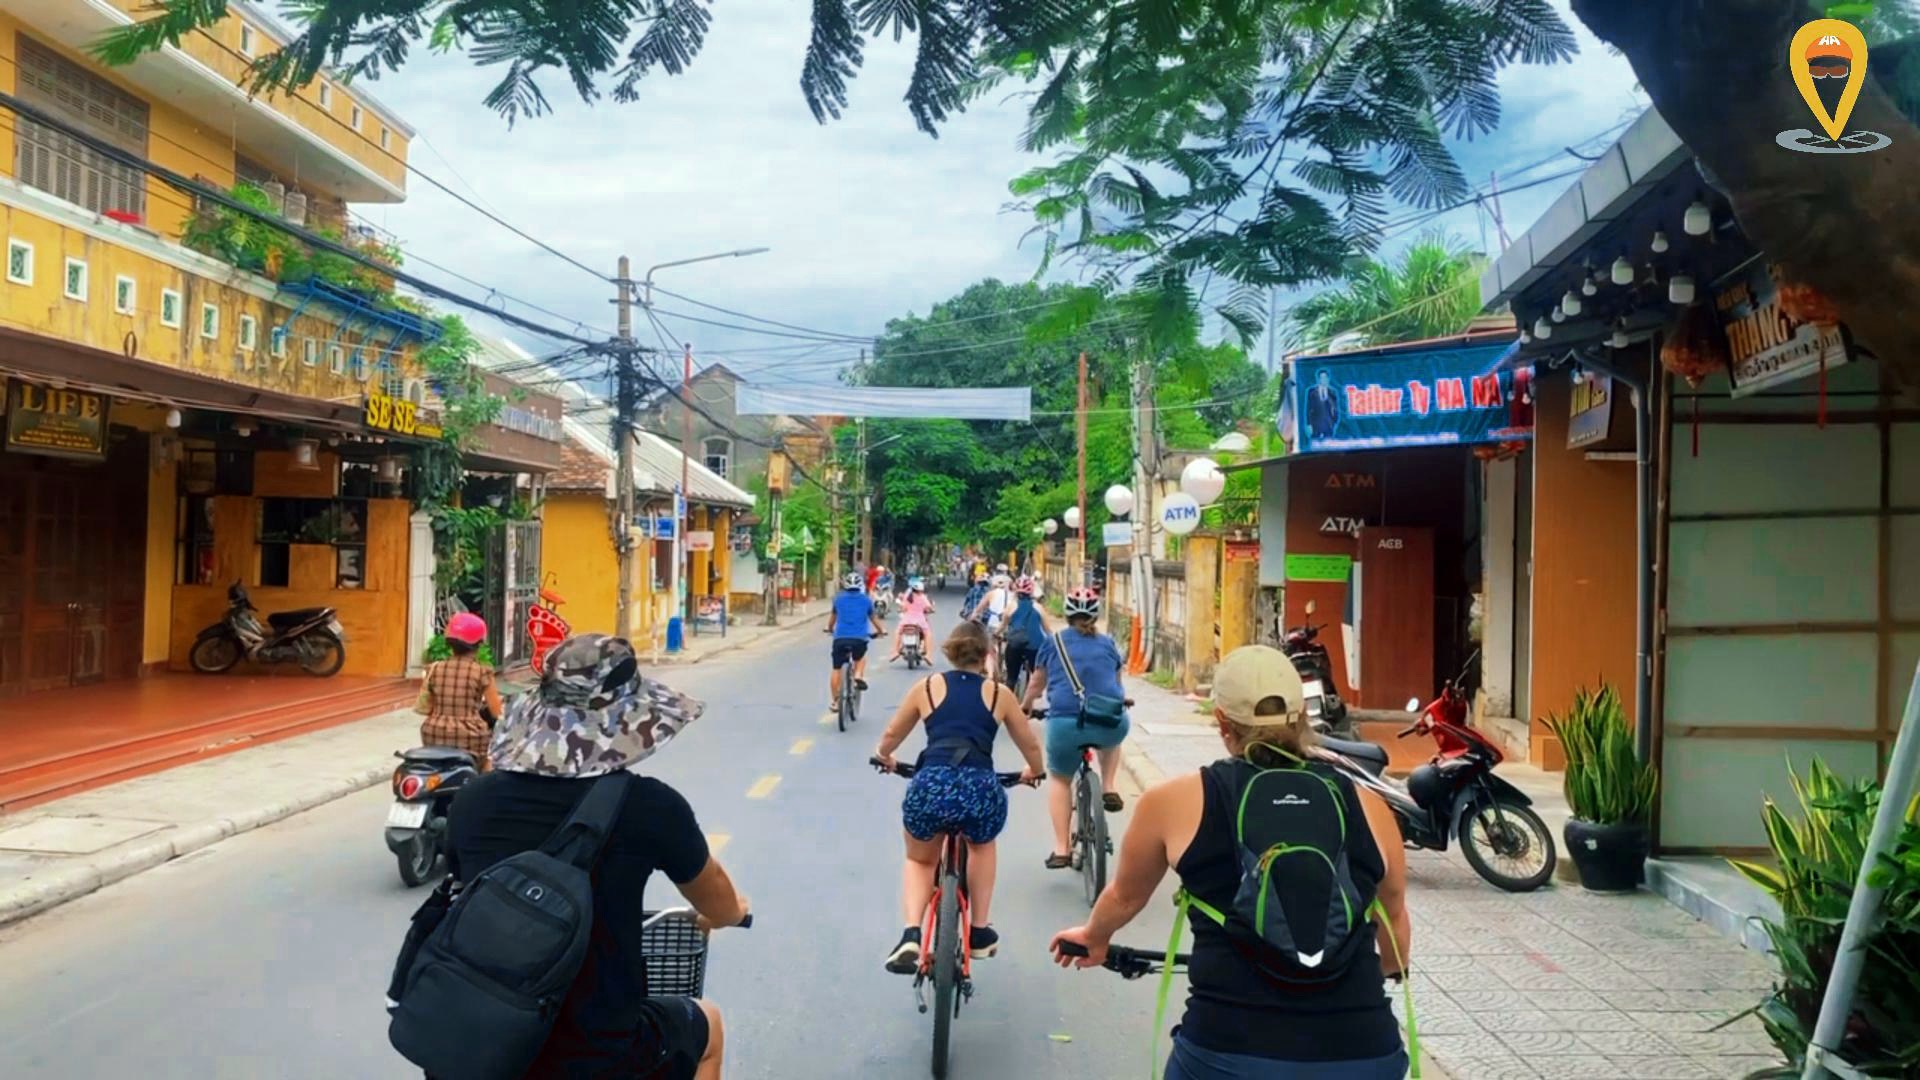 Tourists with mountain bikes in the streets of Hoi An